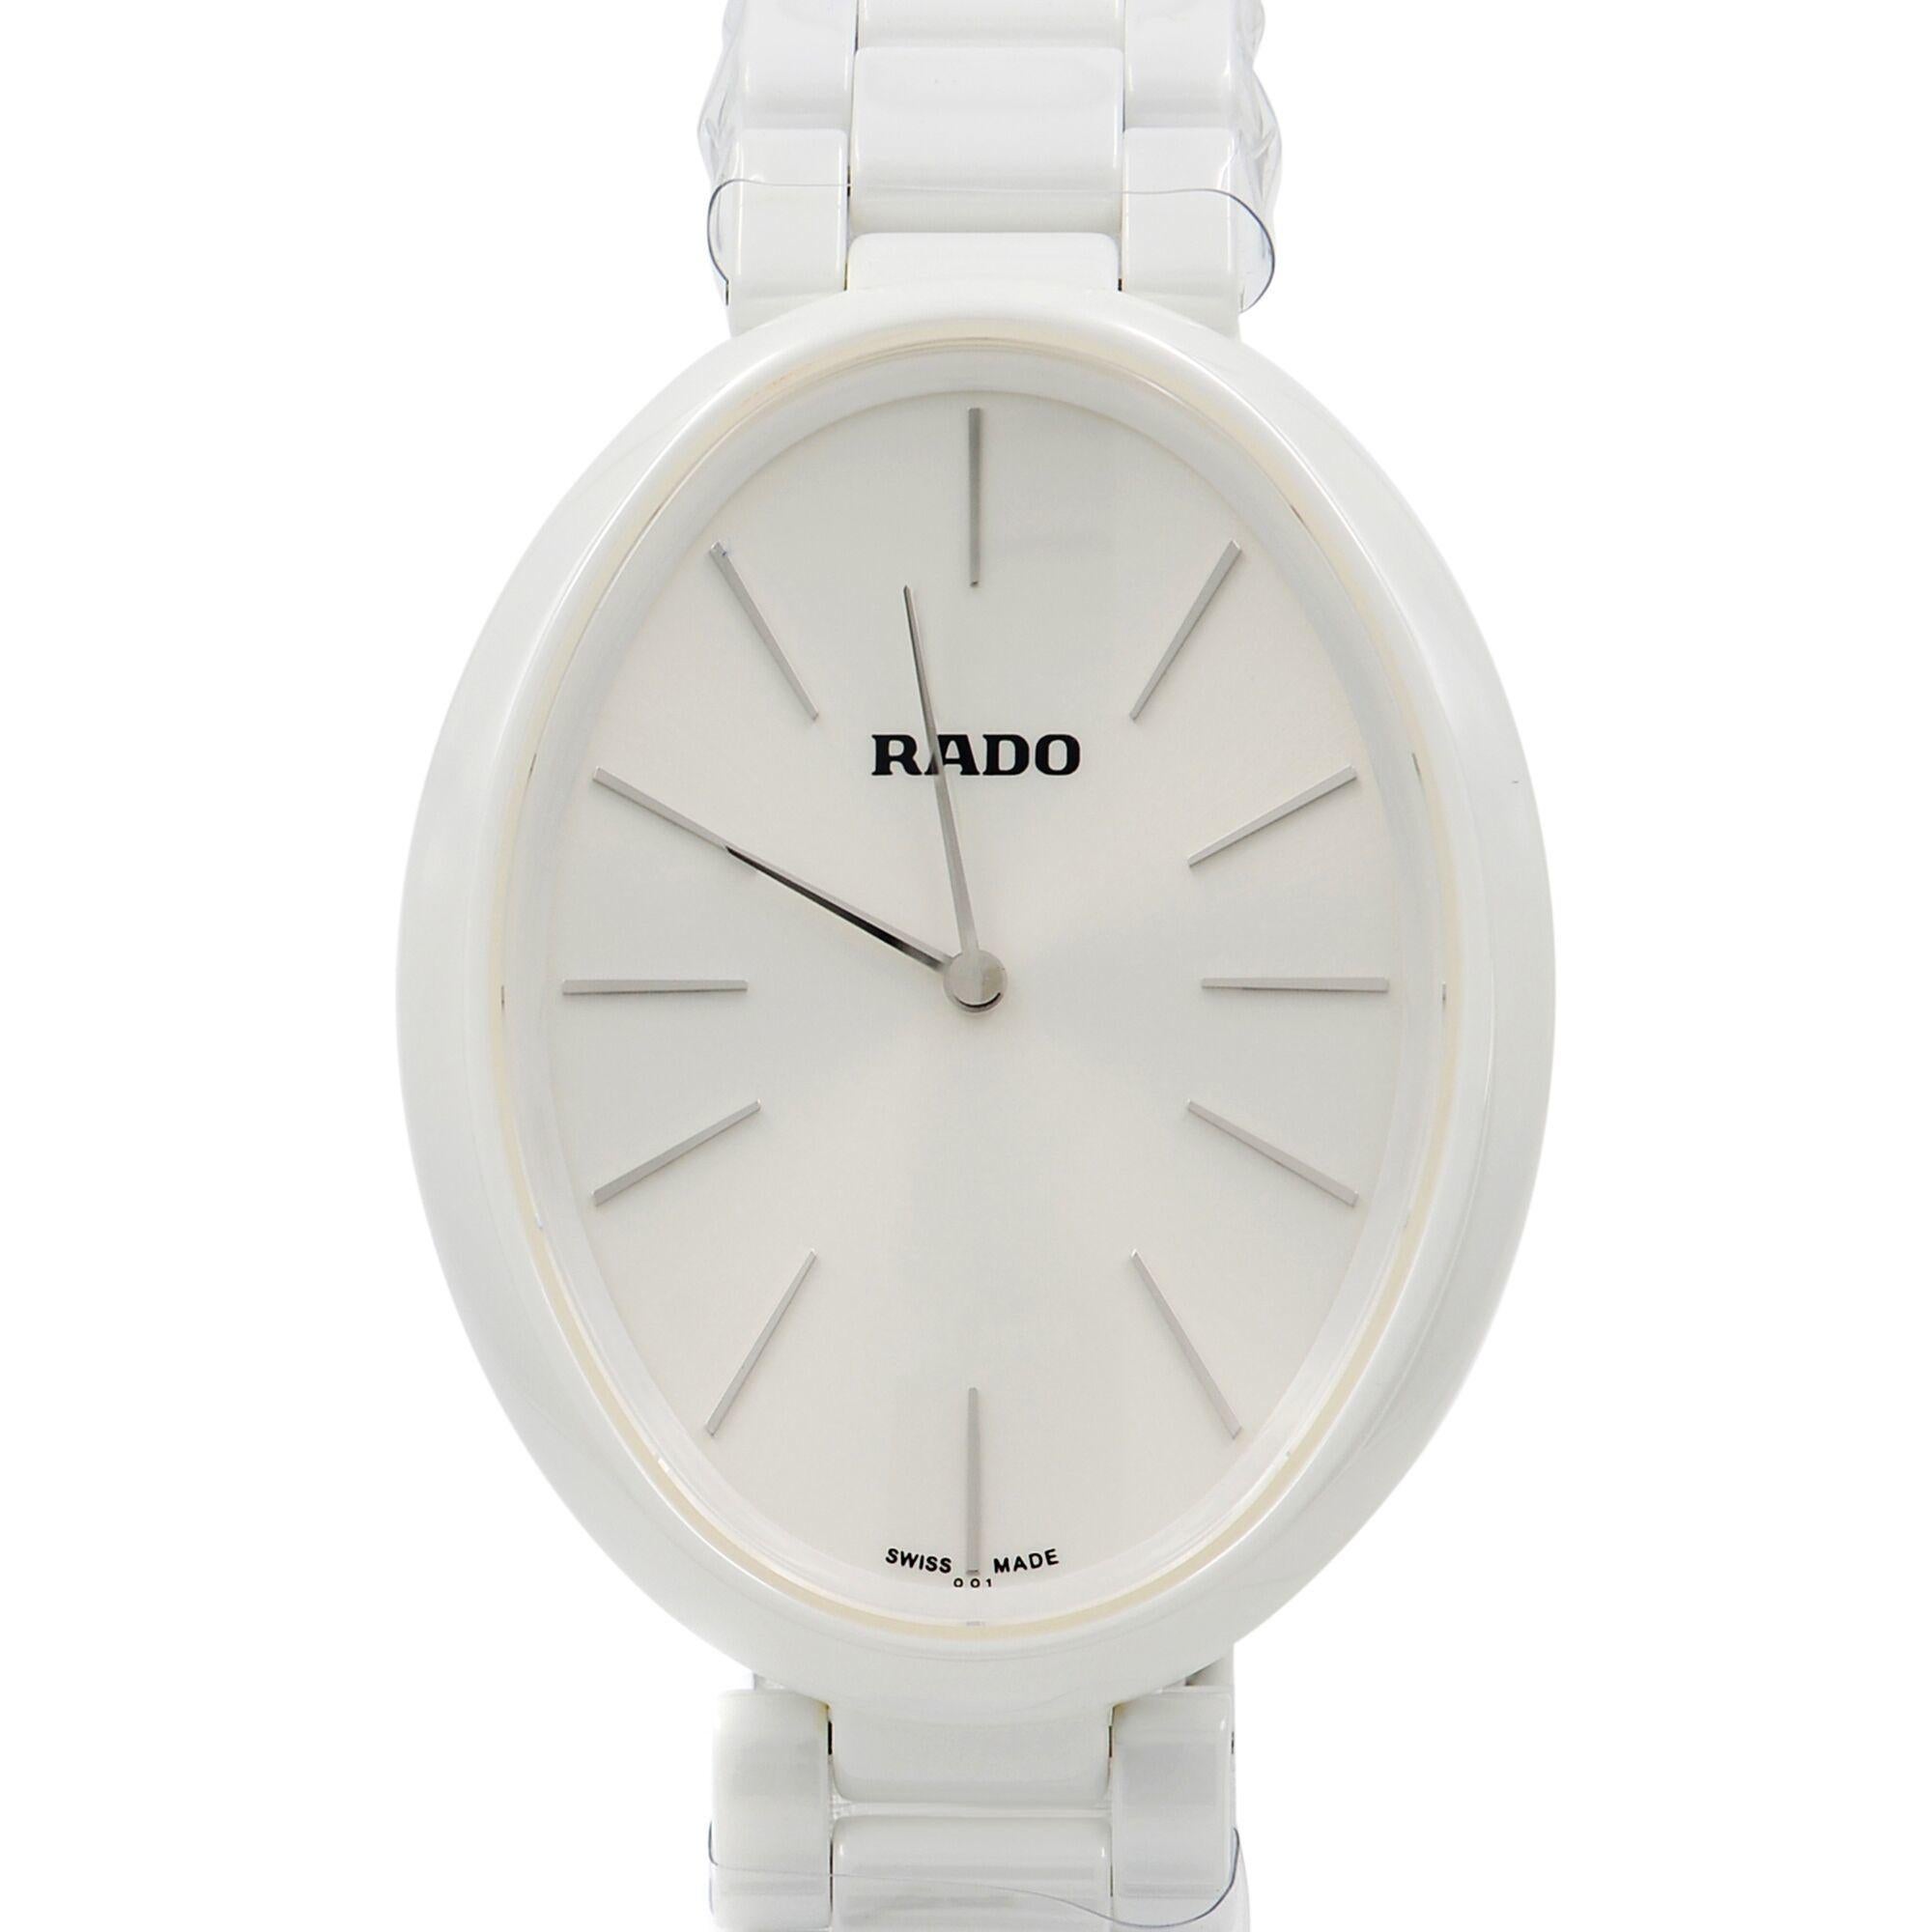 Display Model Rado Esenza R53092012 is a beautiful Ladie's timepiece that is powered by quartz (battery) movement which is cased in a ceramic case. It has a oval shape face, no features dial and has hand sticks style markers. It is completed with a